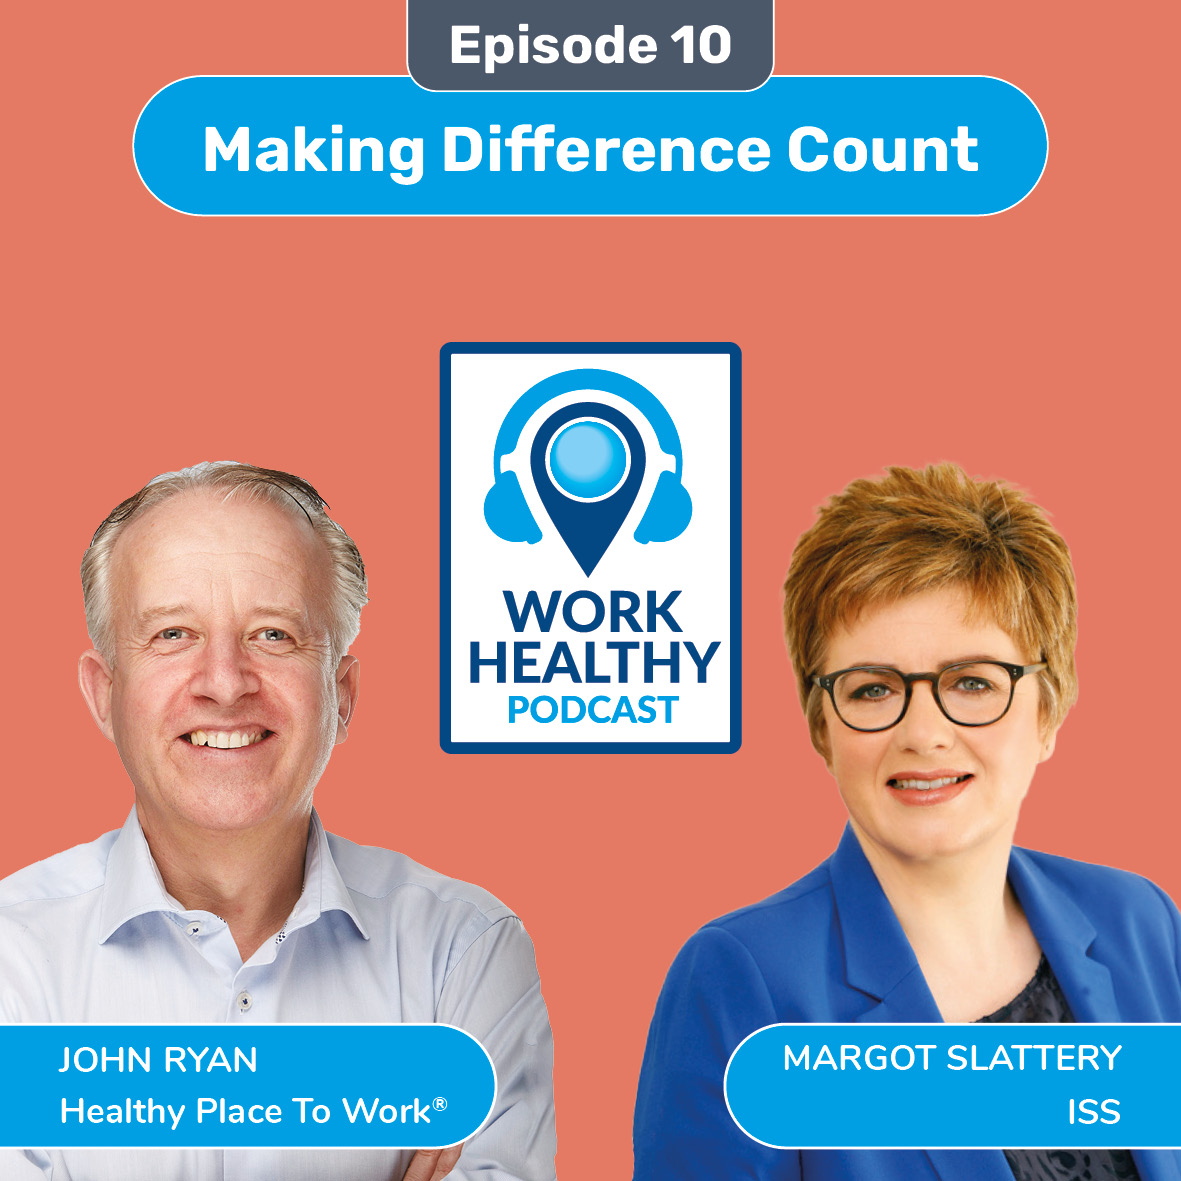 Making Difference Count - Margot Slattery